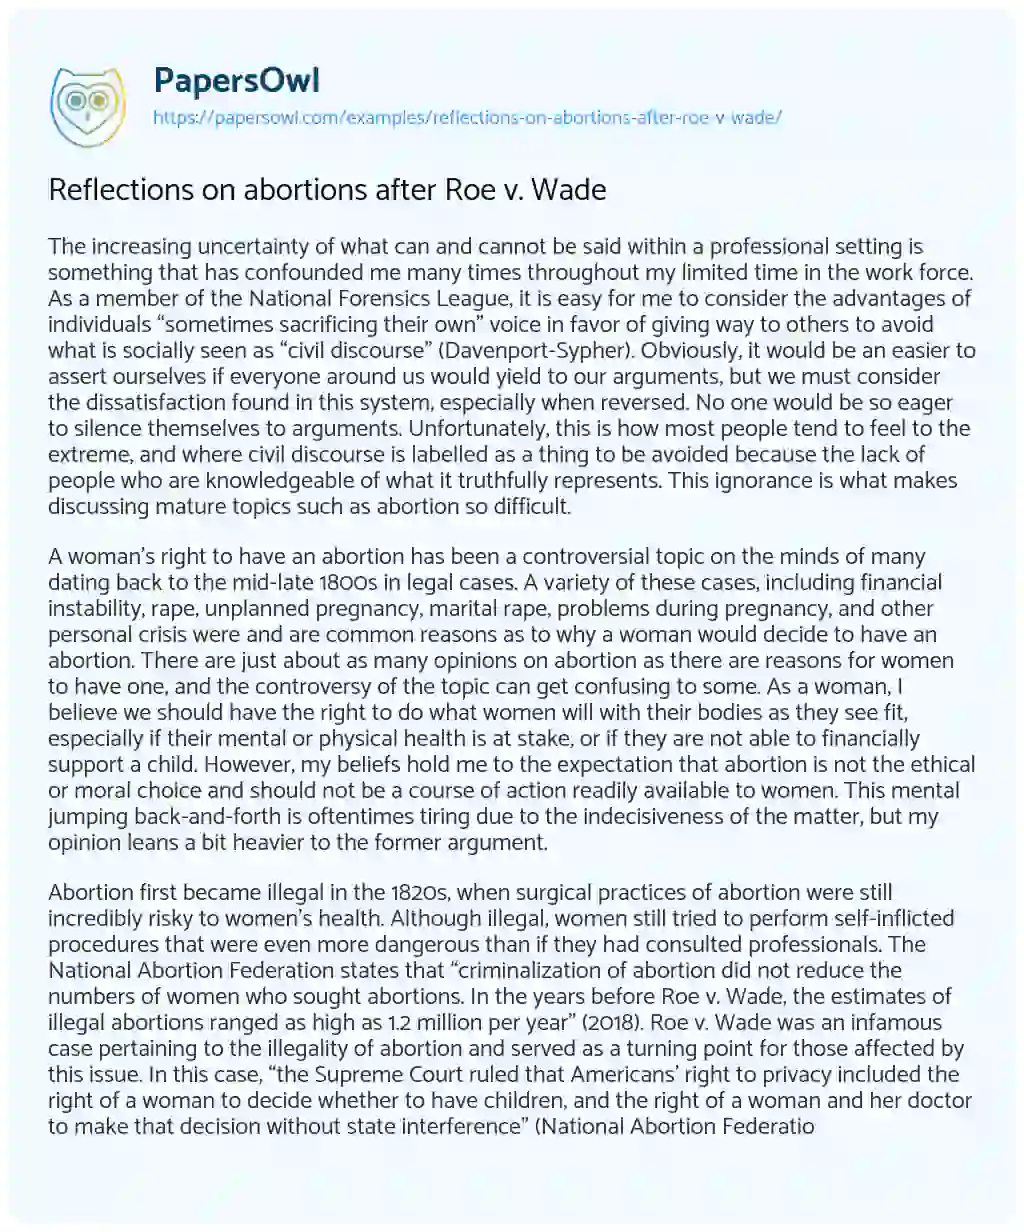 Essay on Reflections on Abortions after Roe V. Wade